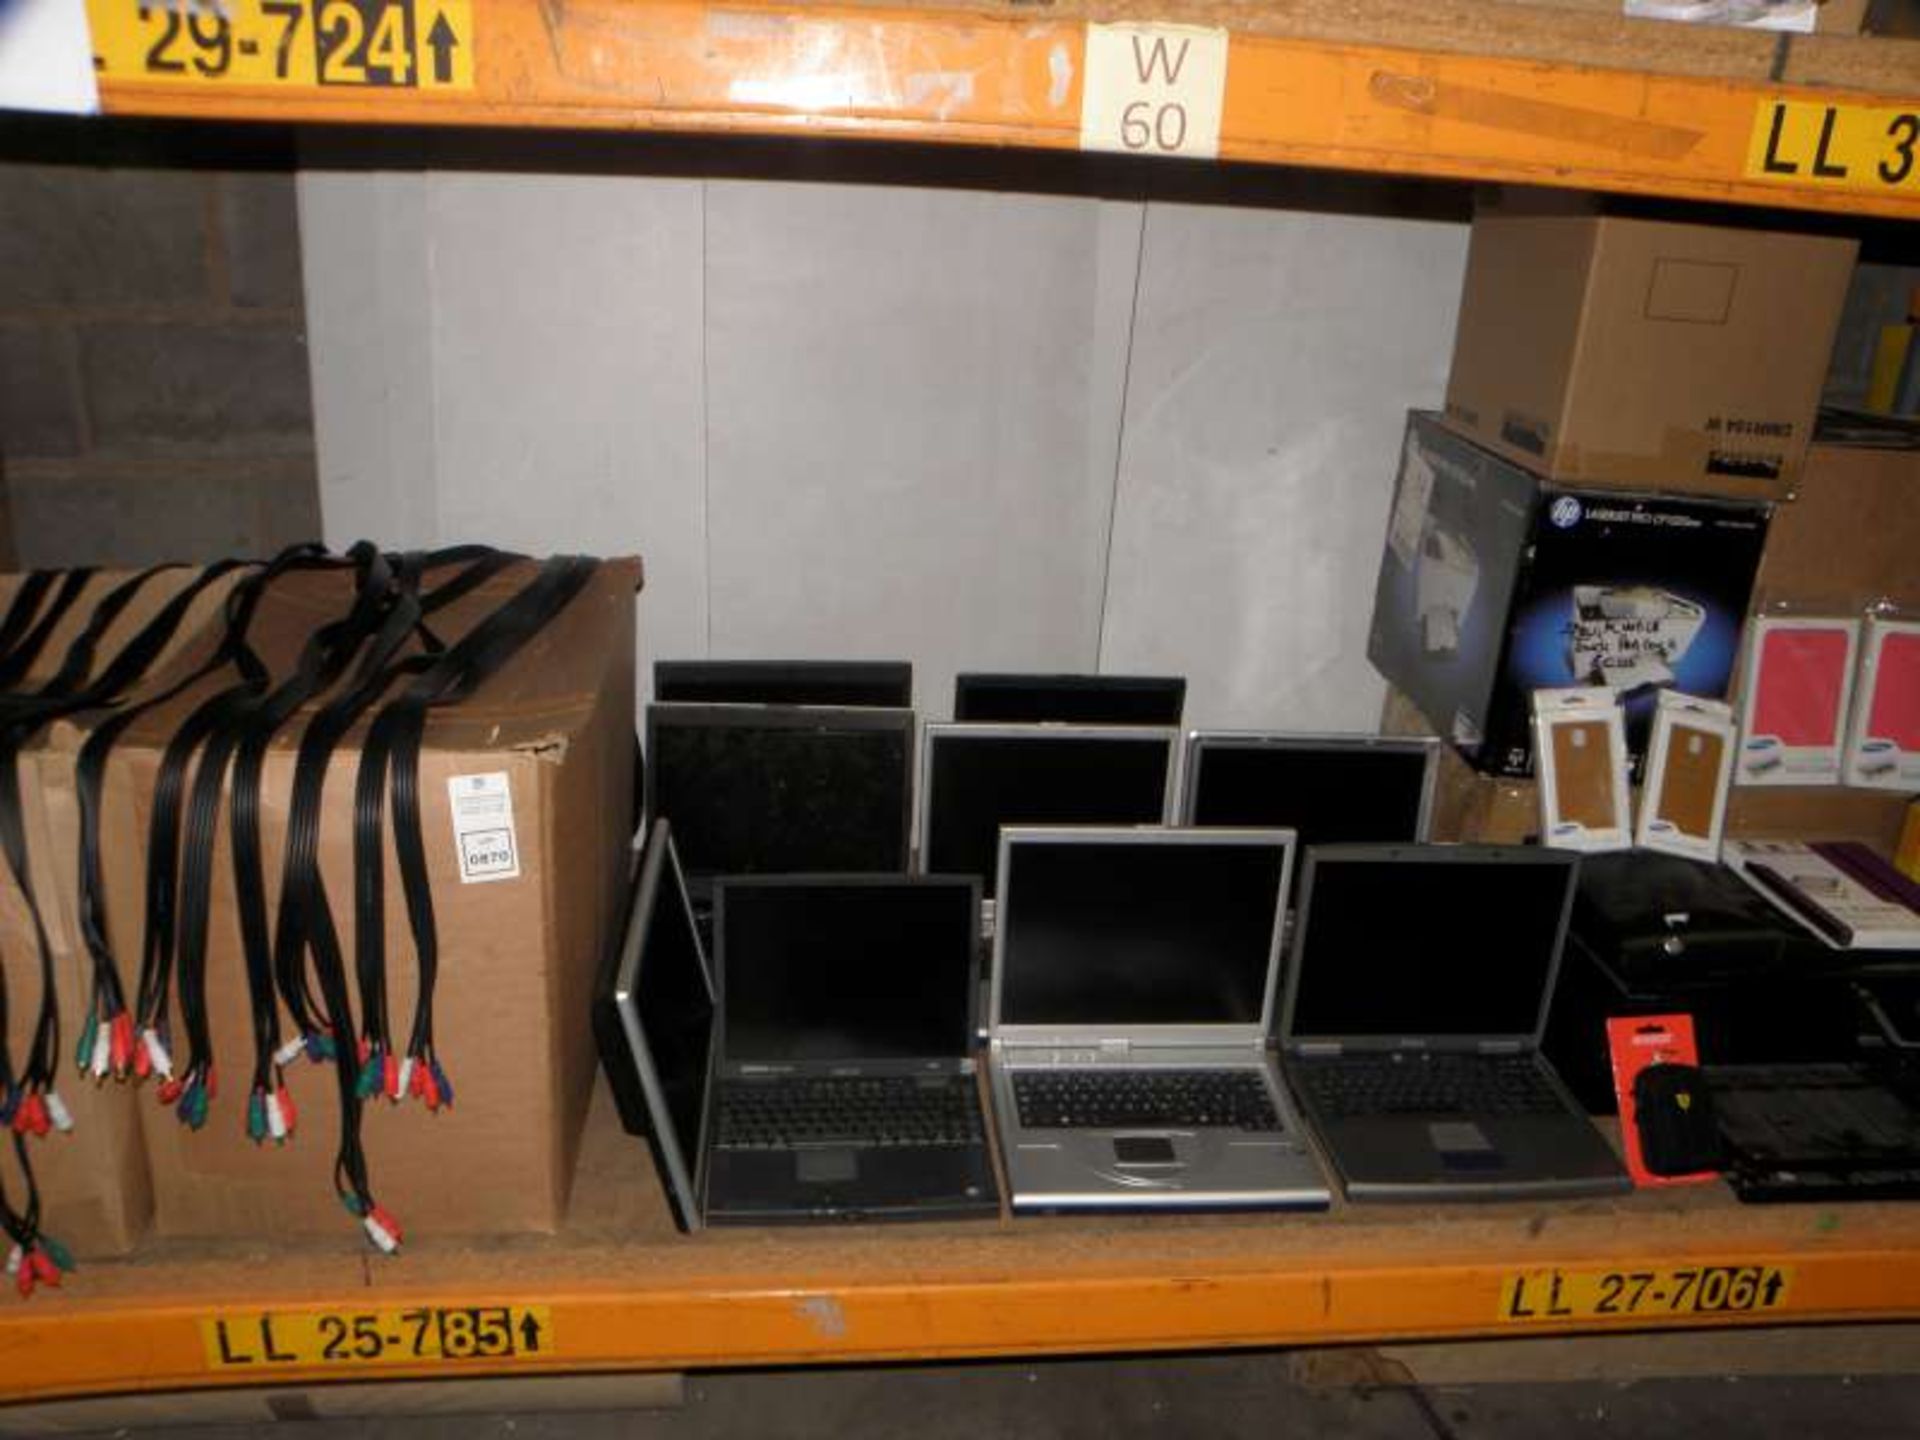 LOT CONTAINING HP PRINTER, 8 X LAPTOPS, MONITOR, MOBILE PHONE AND TABLET COVERS, VARIOUS CABLES